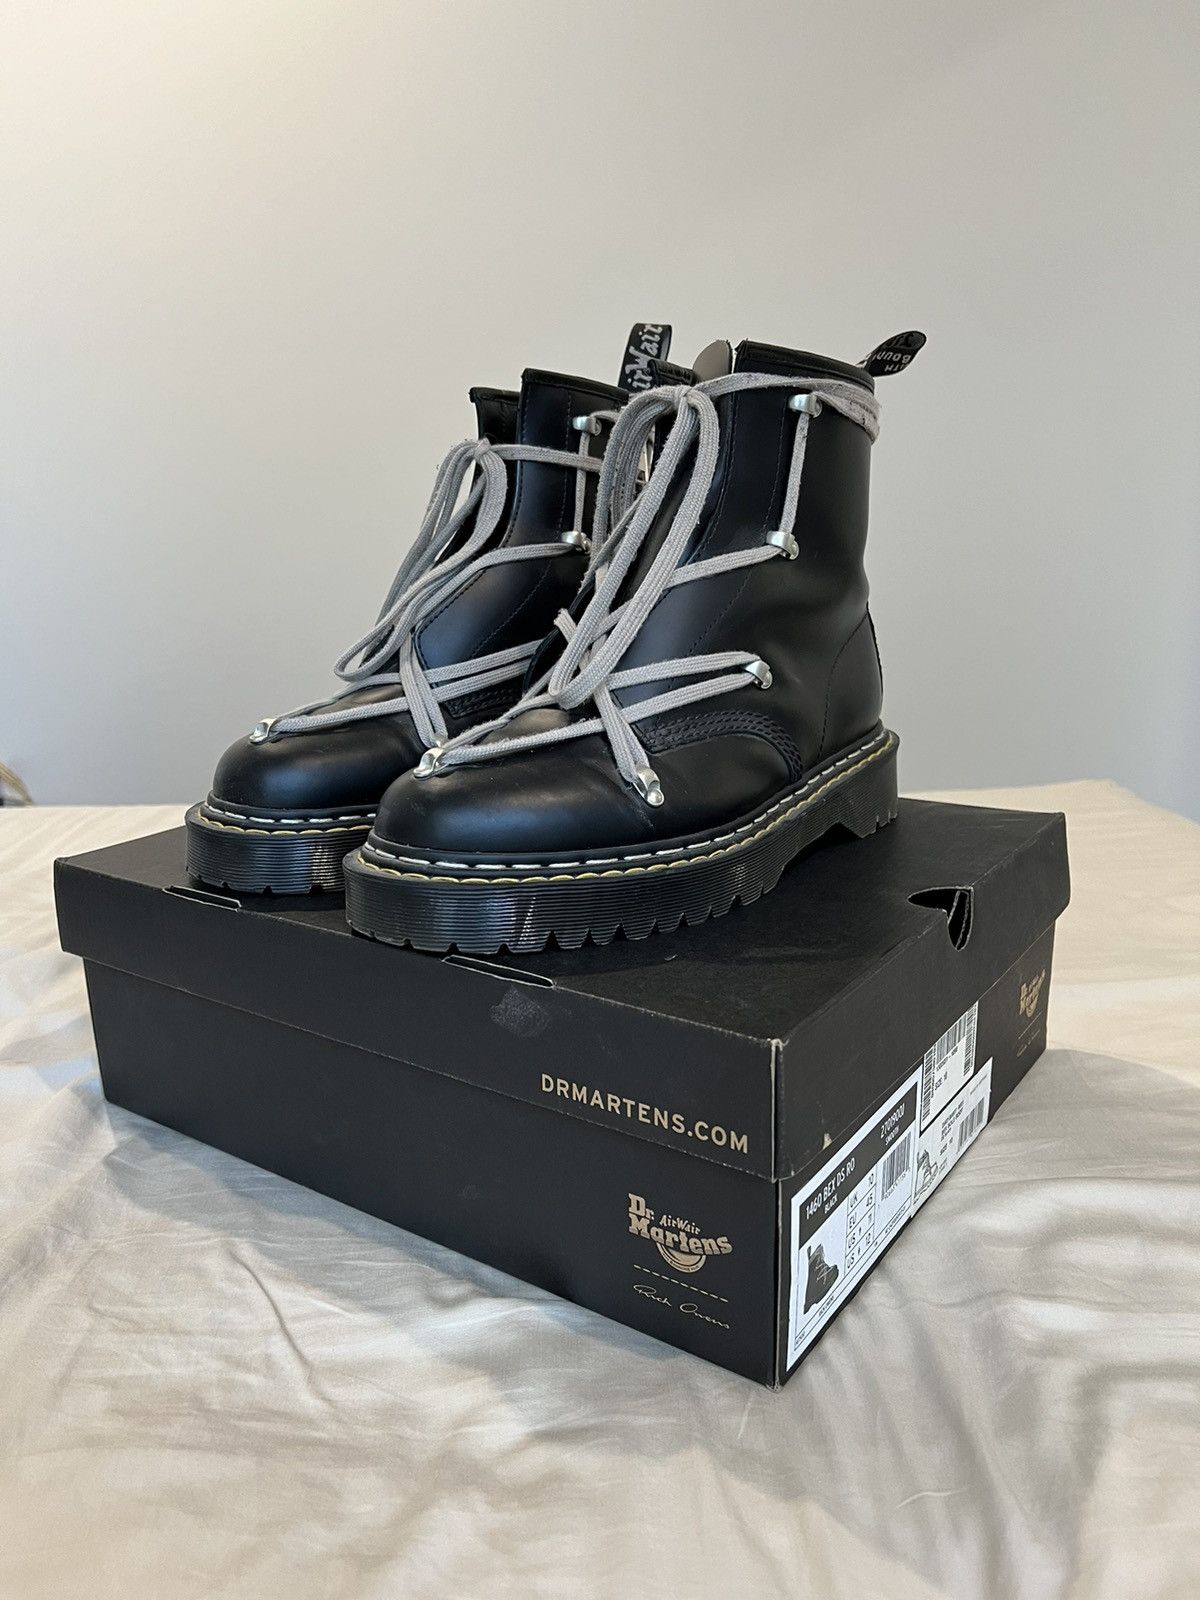 Rick Owens Rick Owens x Doc Martens 1460 Bex Leather Boots | Grailed